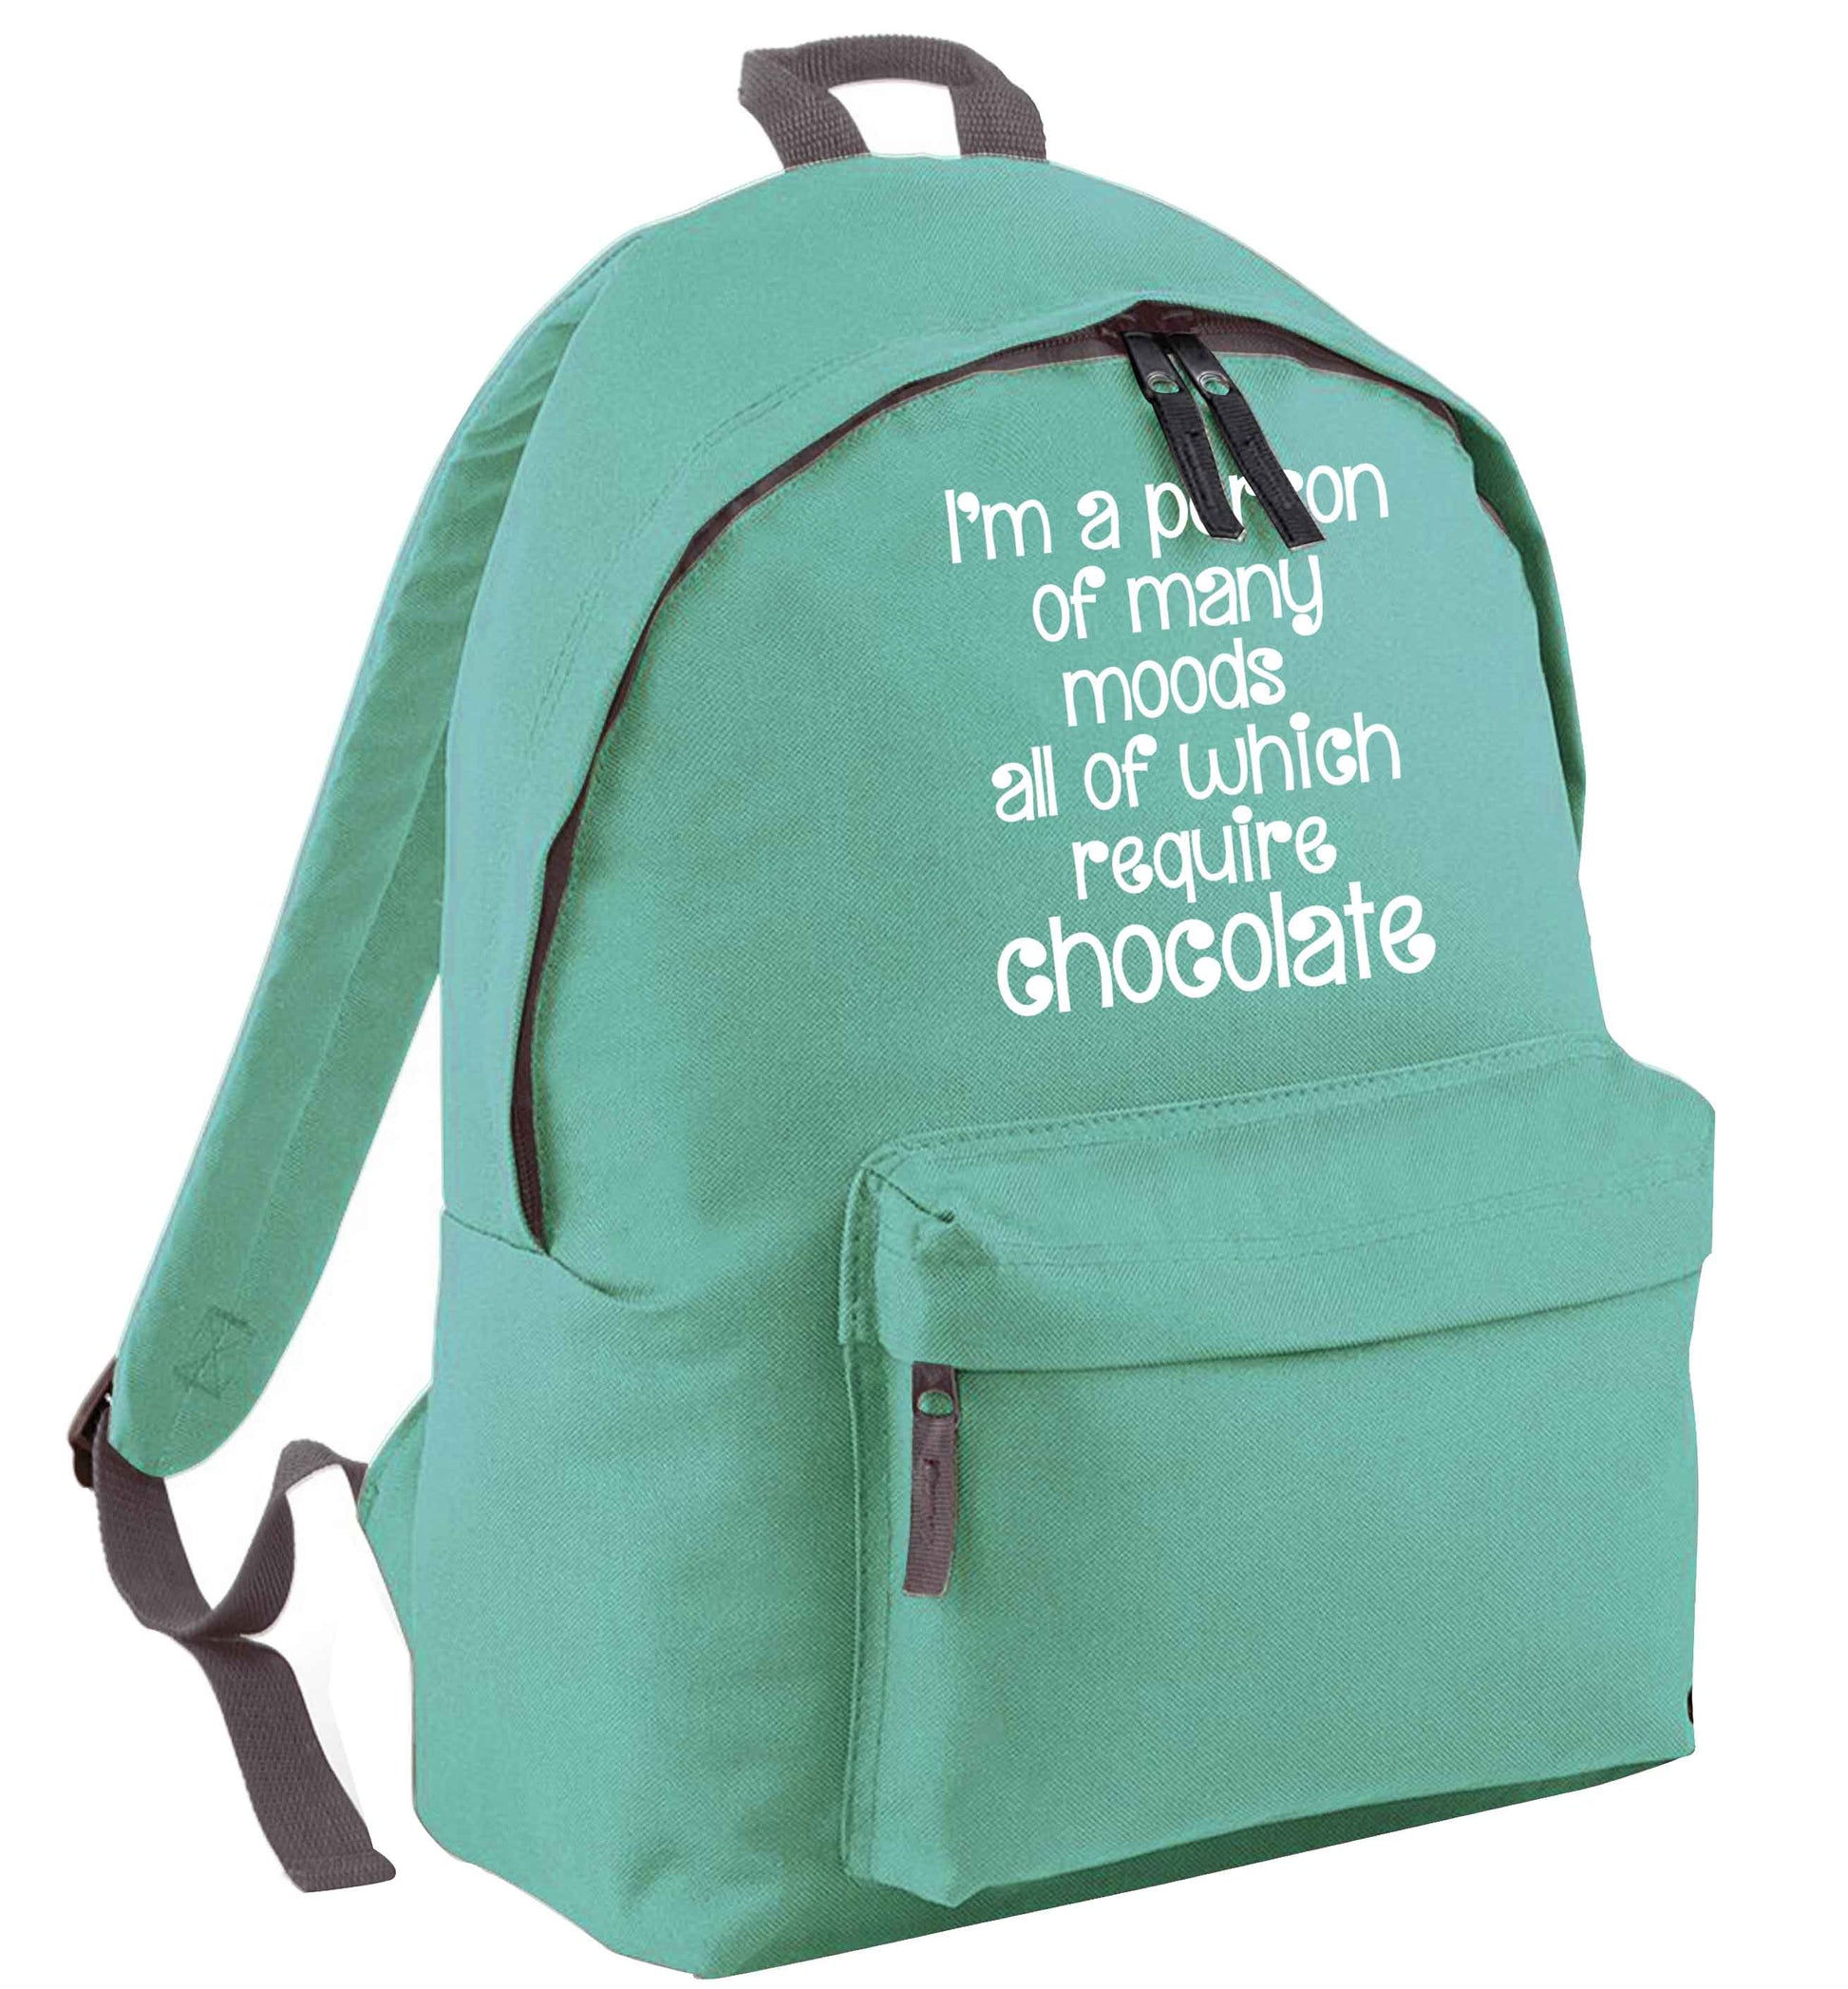 funny gift for a chocaholic! I'm a person of many moods all of which require chocolate mint adults backpack